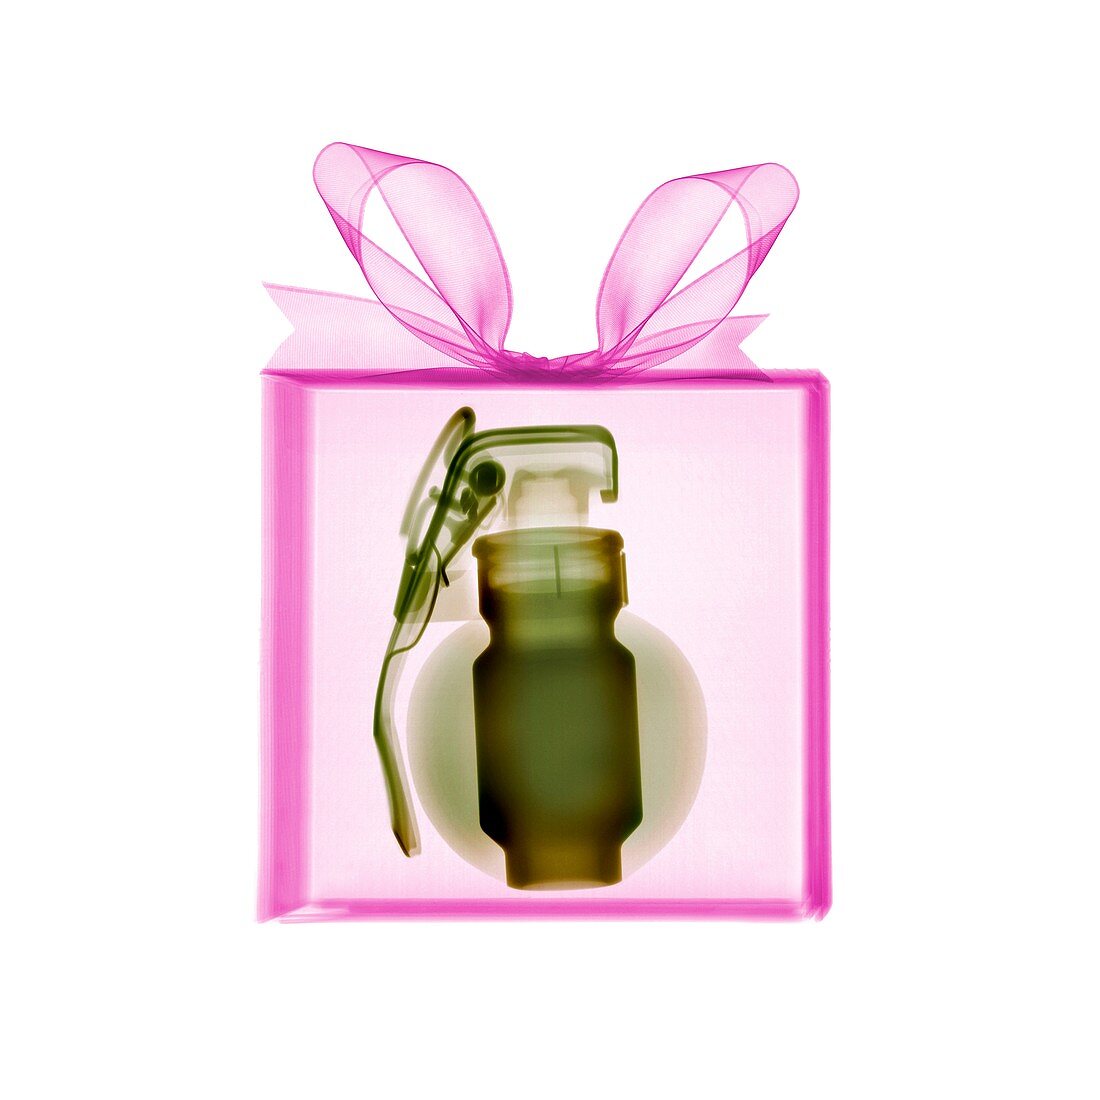 Gift wrapped present containing grenade, X-ray